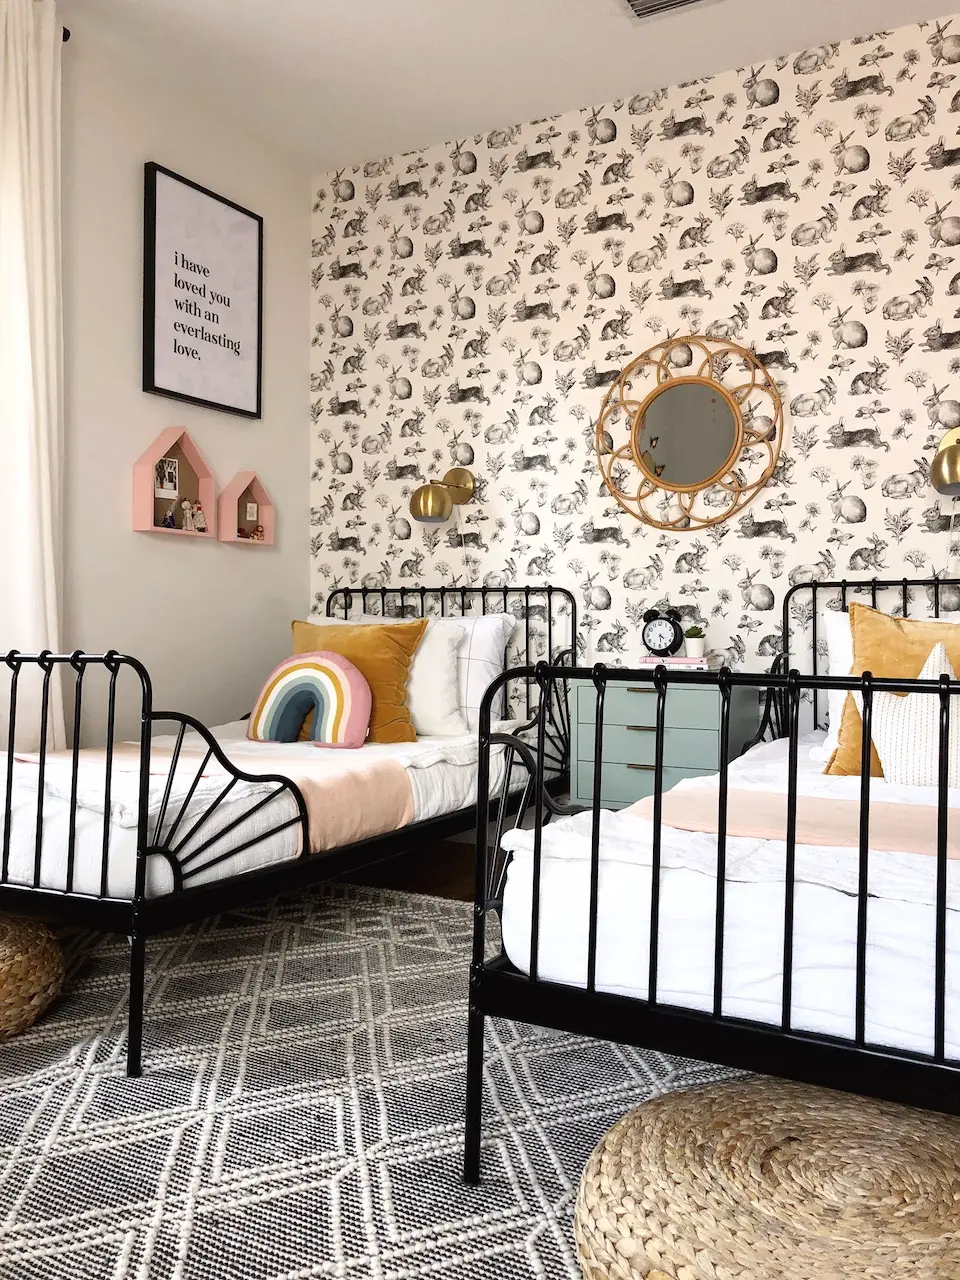 shared girls bedroom with twin beds and rabbit wallpaper